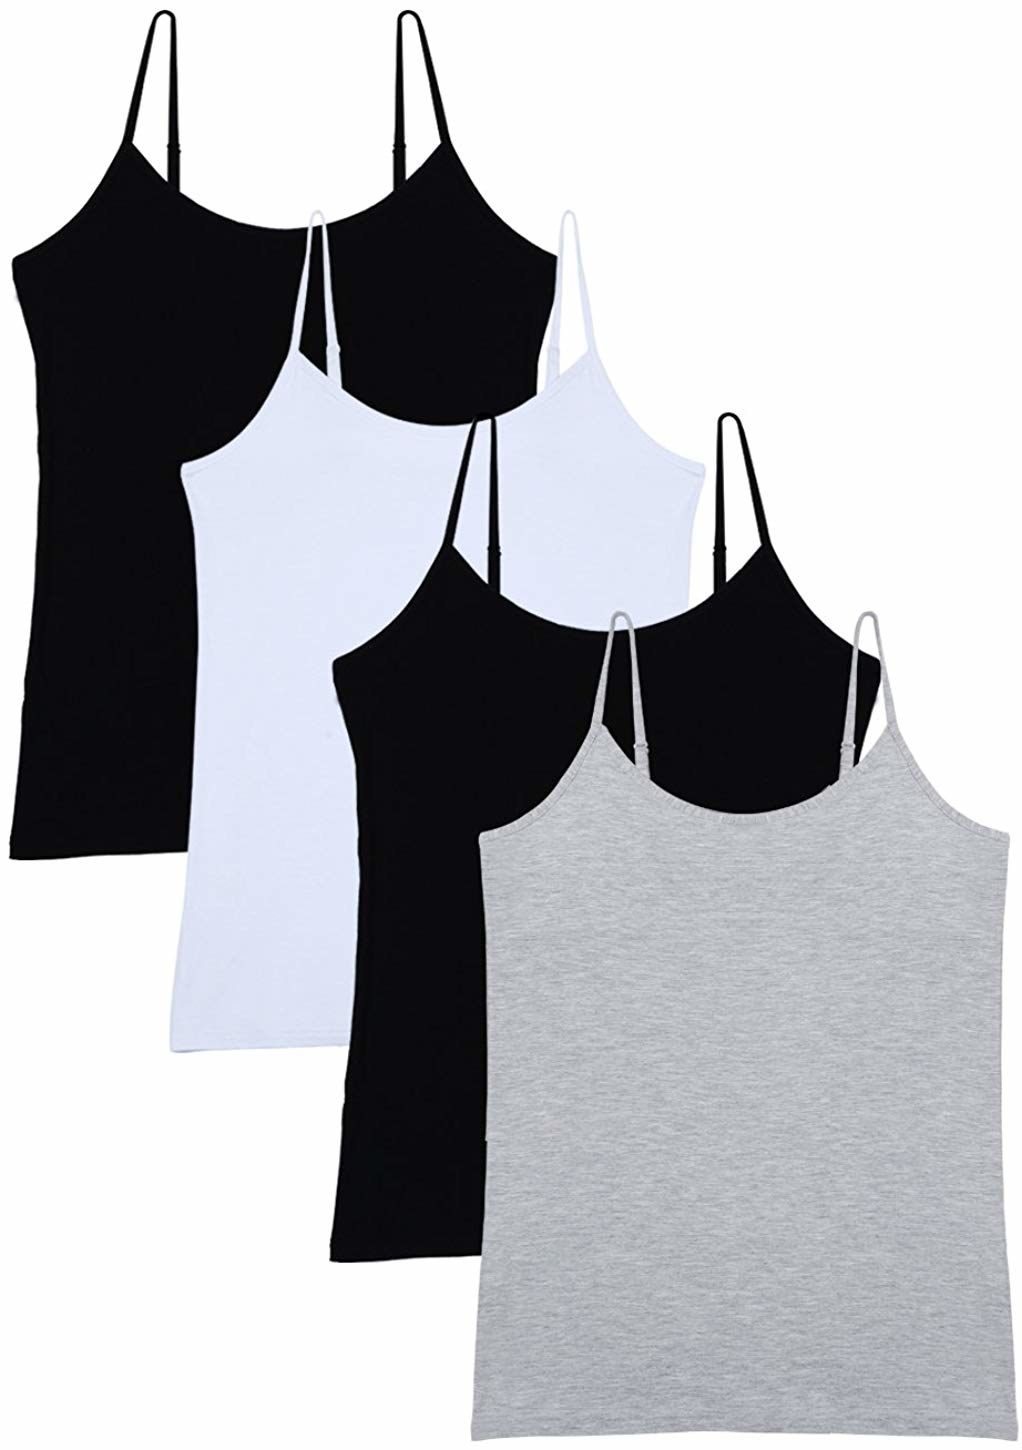 A set of the camis in gray, white, and black